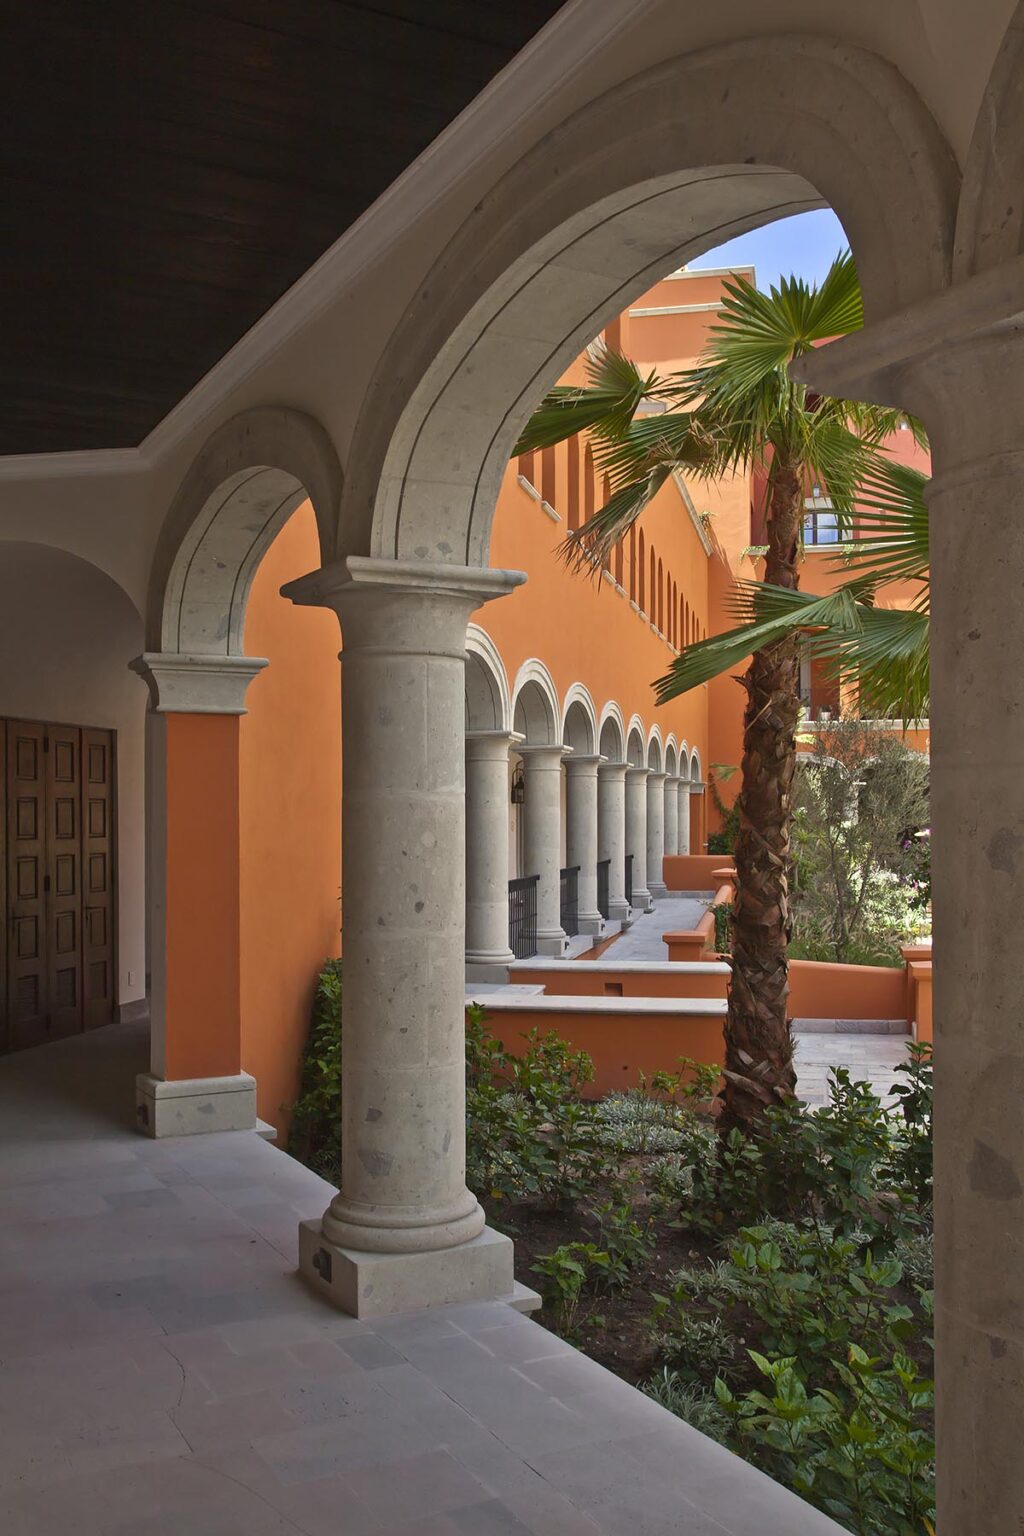 Exterior and grounds of the recently built ROSEWOOD HOTEL - SAN MIGUEL DE ALLENDE,  GUANAJUATO, MEXICO